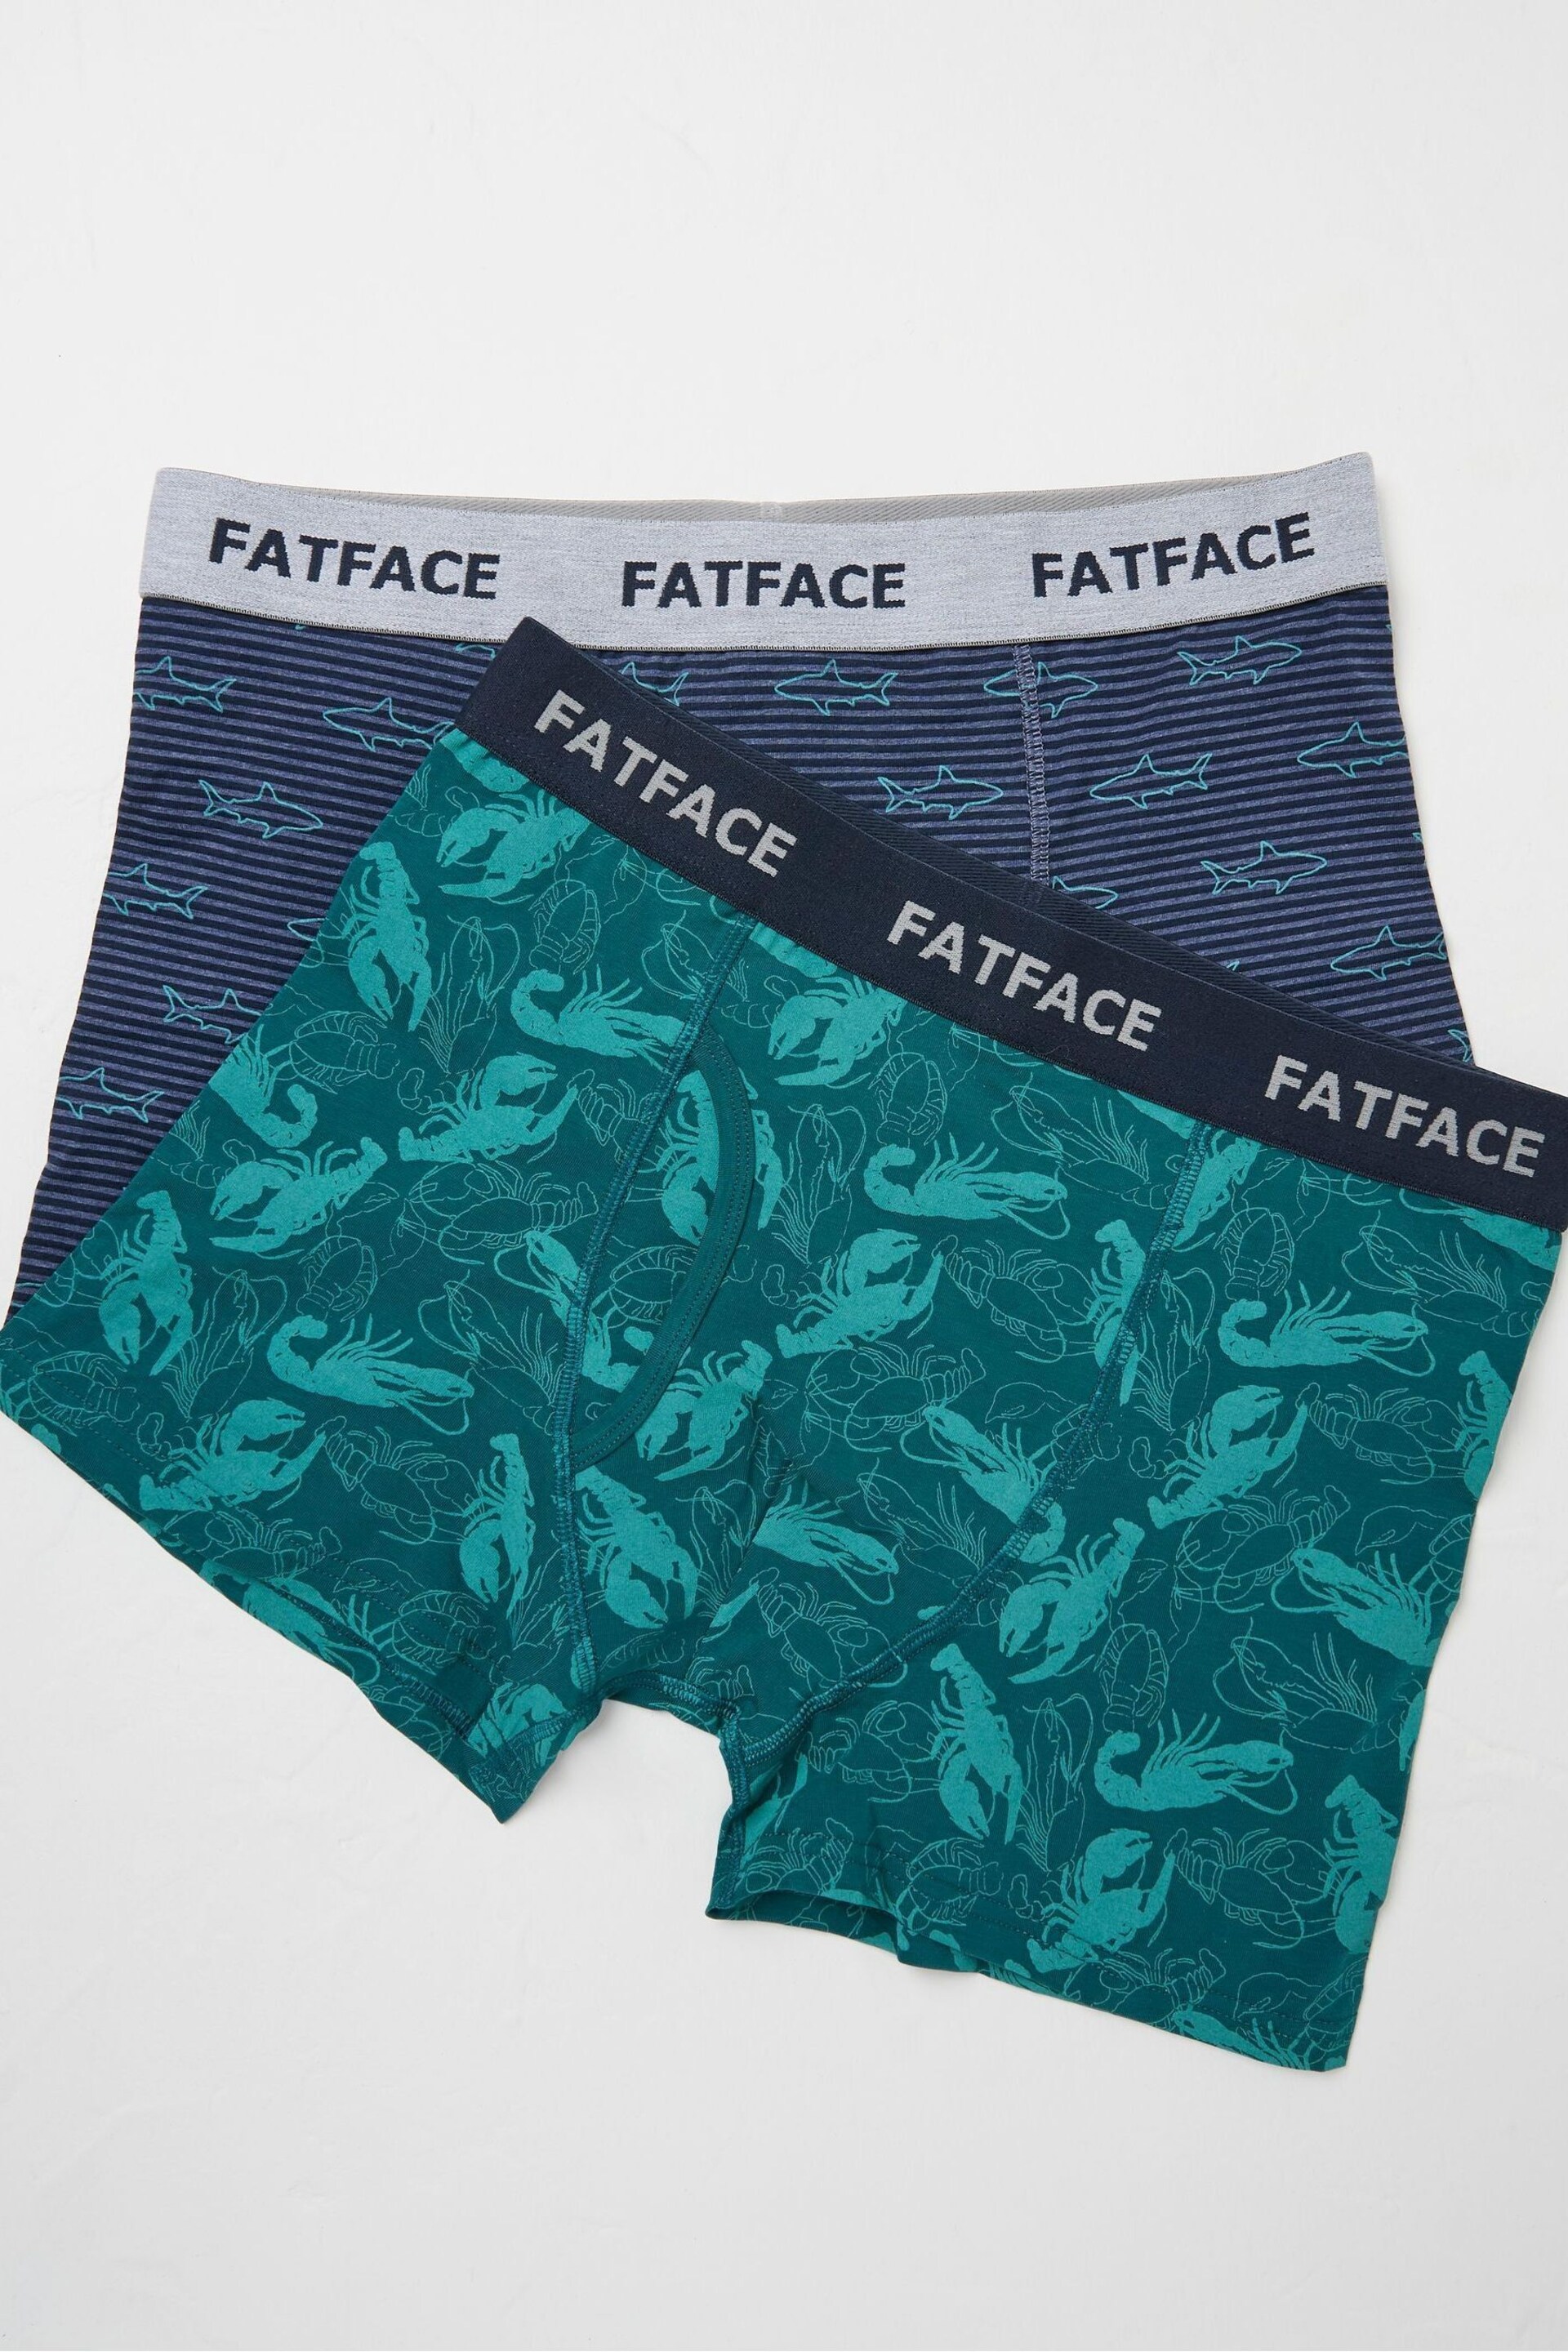 FatFace Blue Lobster Shark Boxers 2 Pack - Image 1 of 2